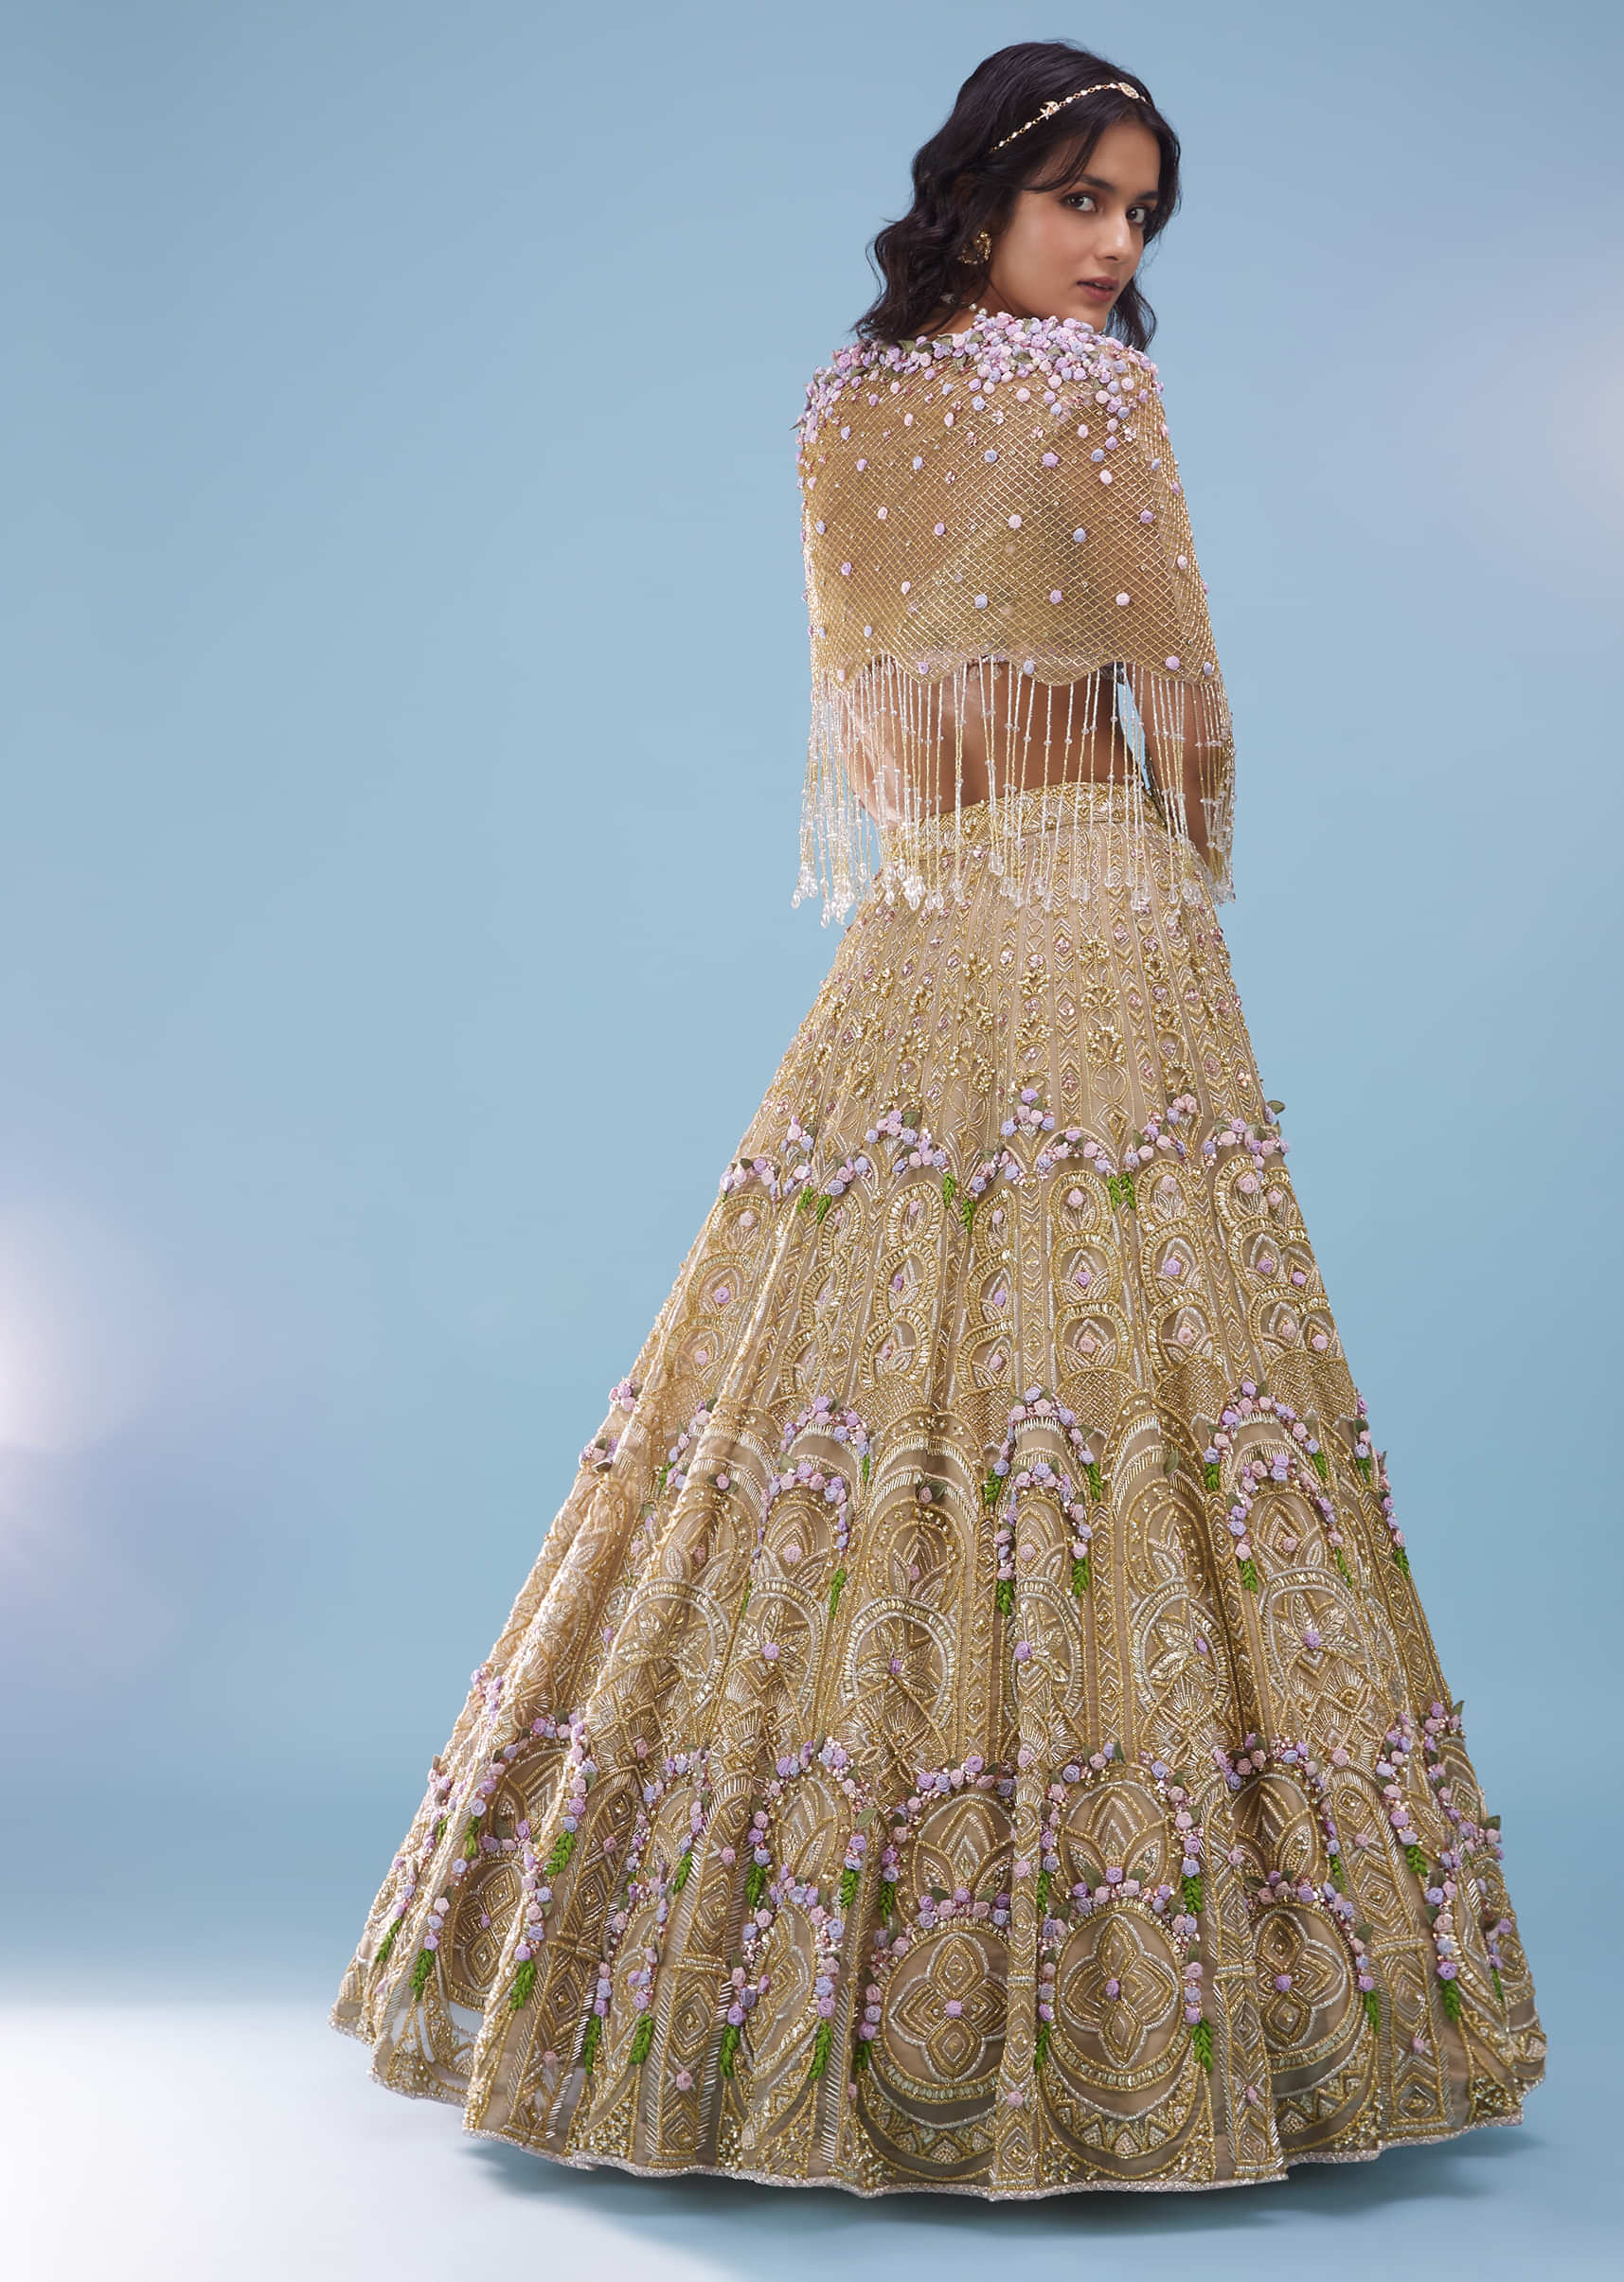 Gold Toned Bridal Naziaa Beige Lehenga With 3D FLoral Embroidery And An Embroidered Shoulder Rest- NOOR 2022